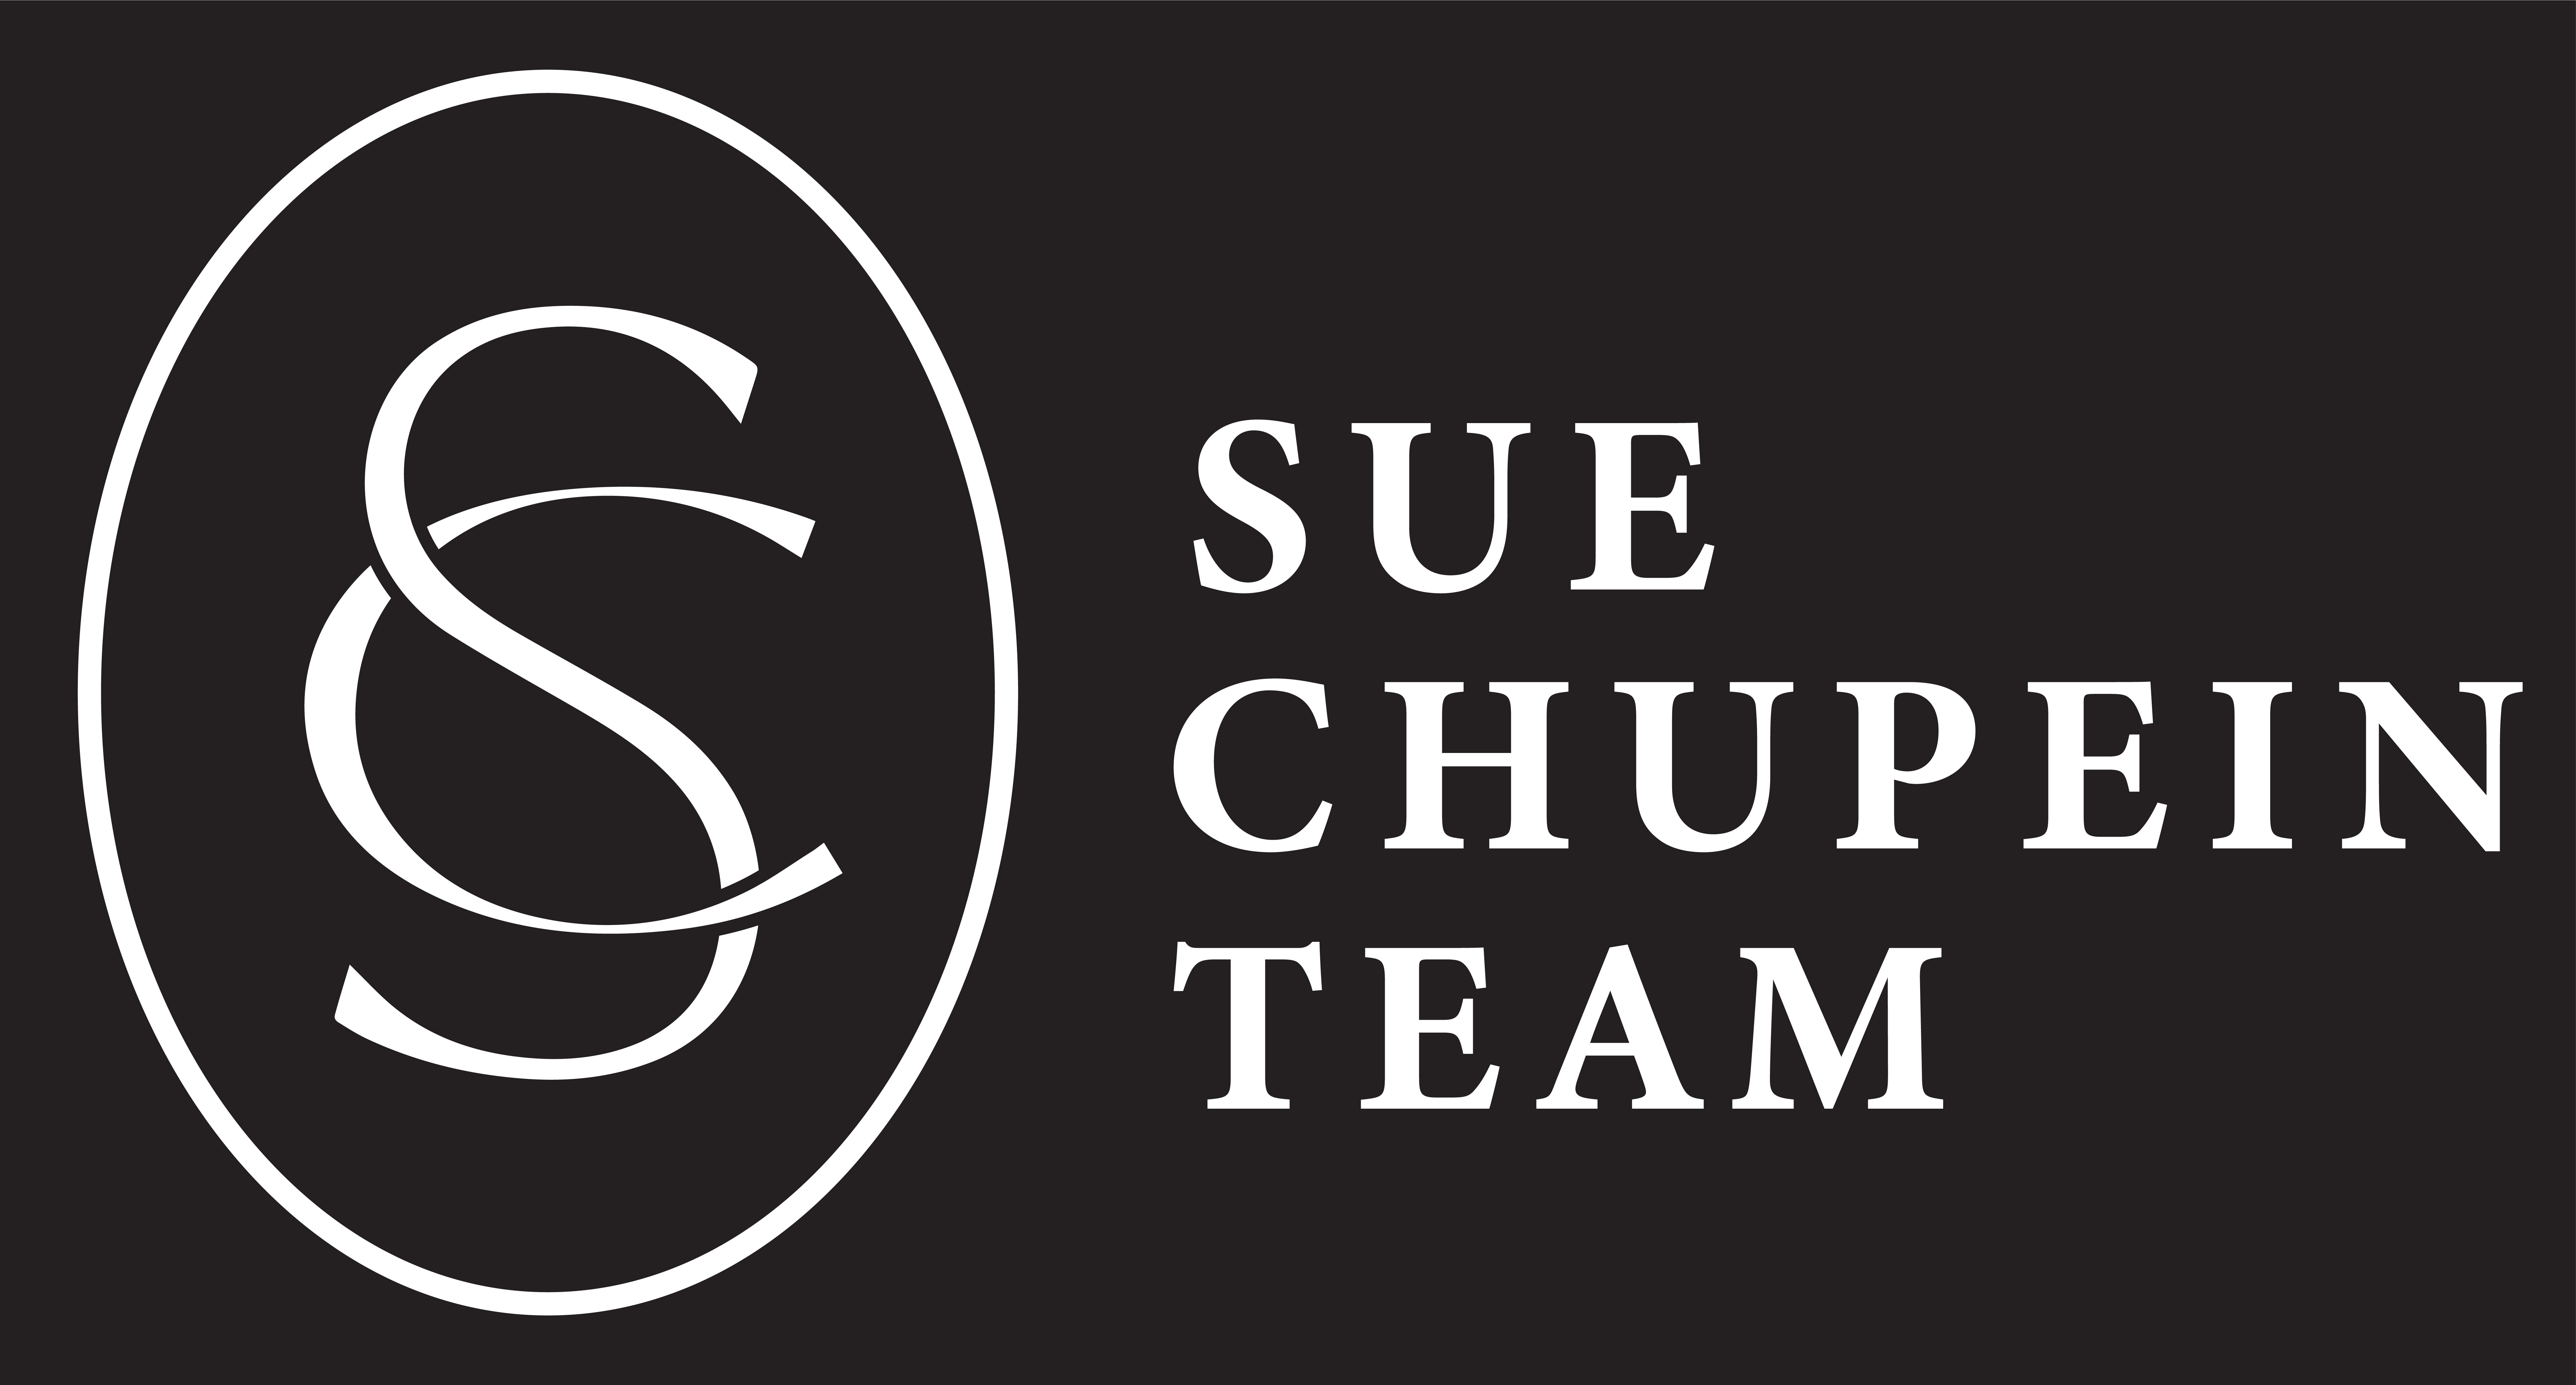 A text banner with the word SUE